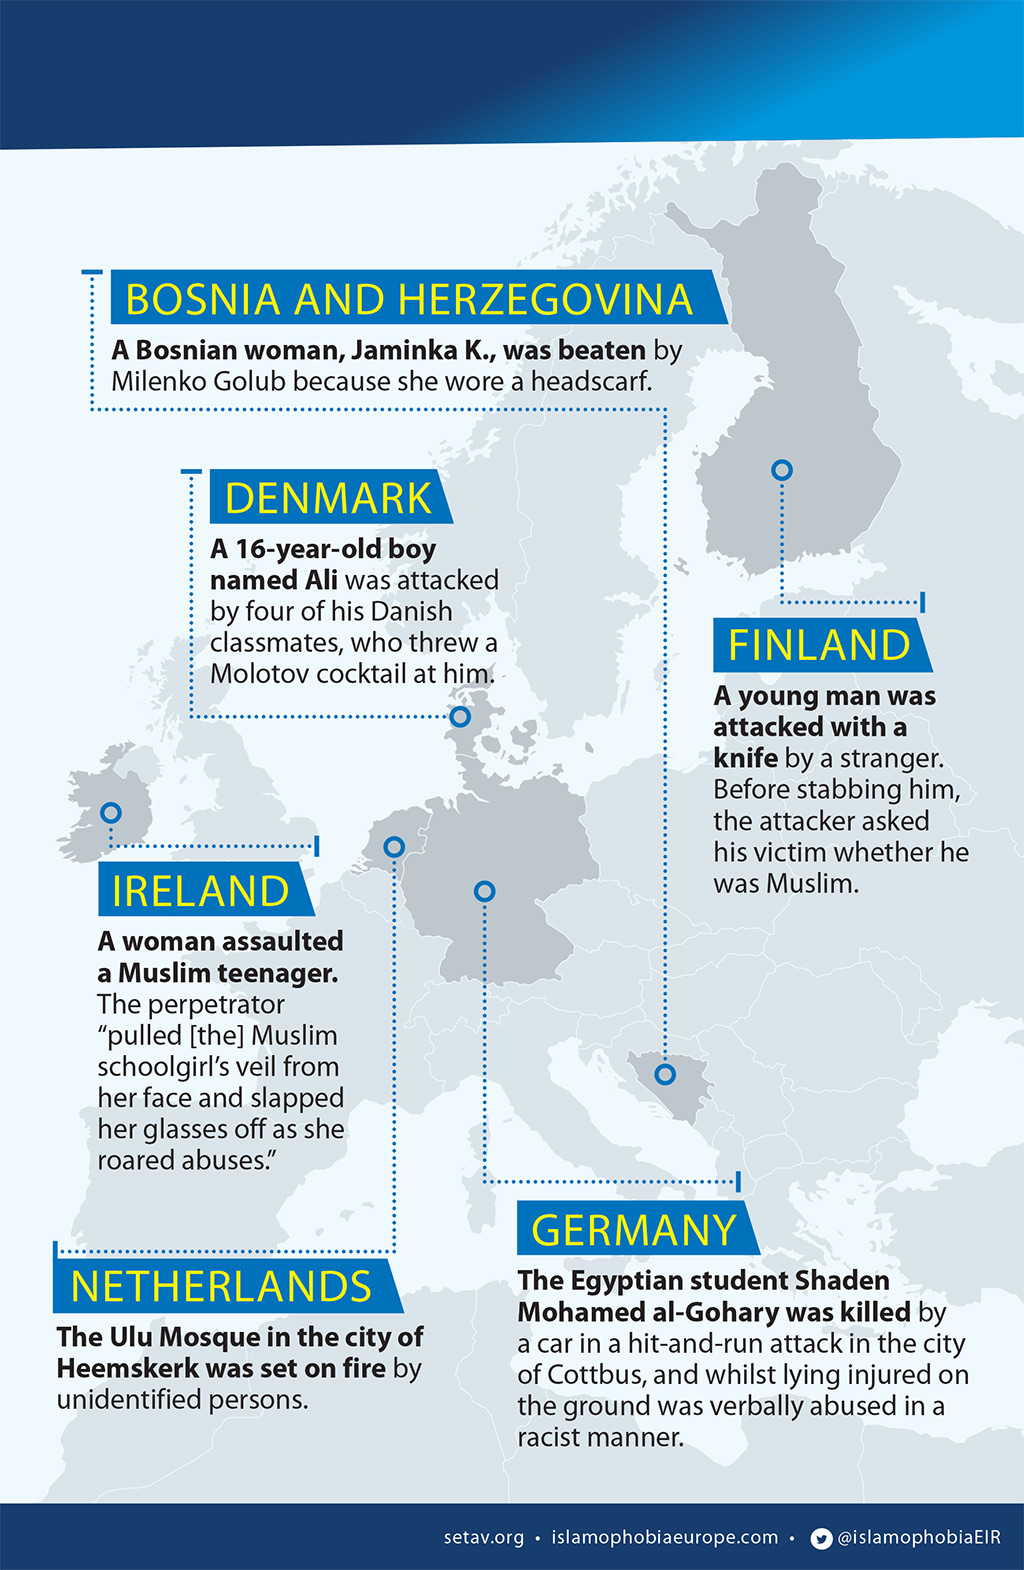 Violent acts against Muslims in Europe